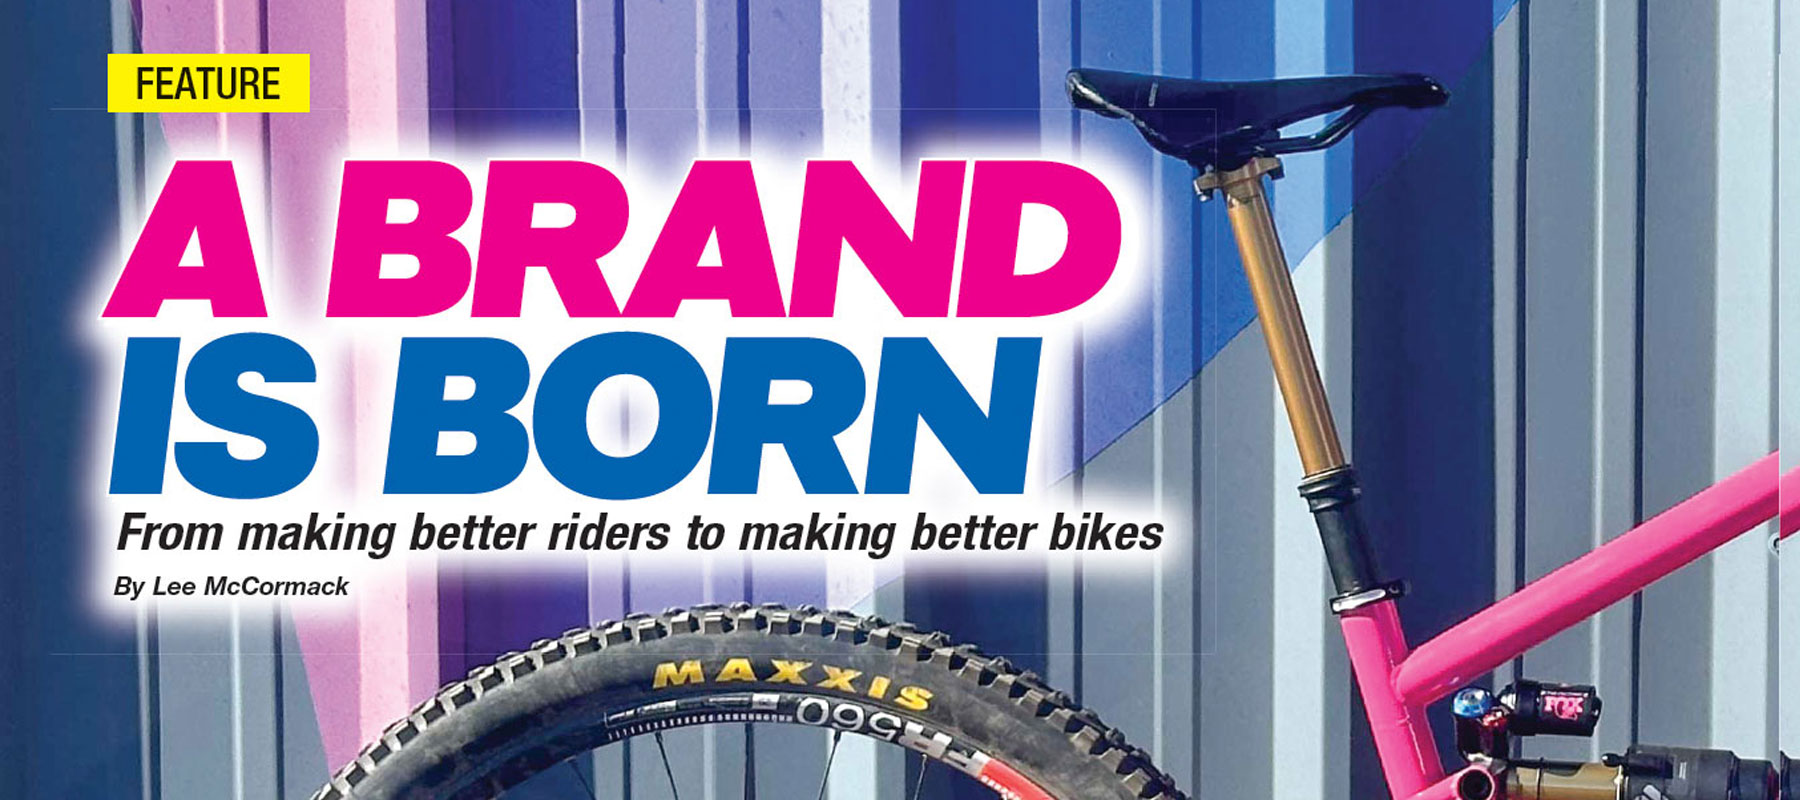 Birth of a brand – Mountain Bike Action magazine article